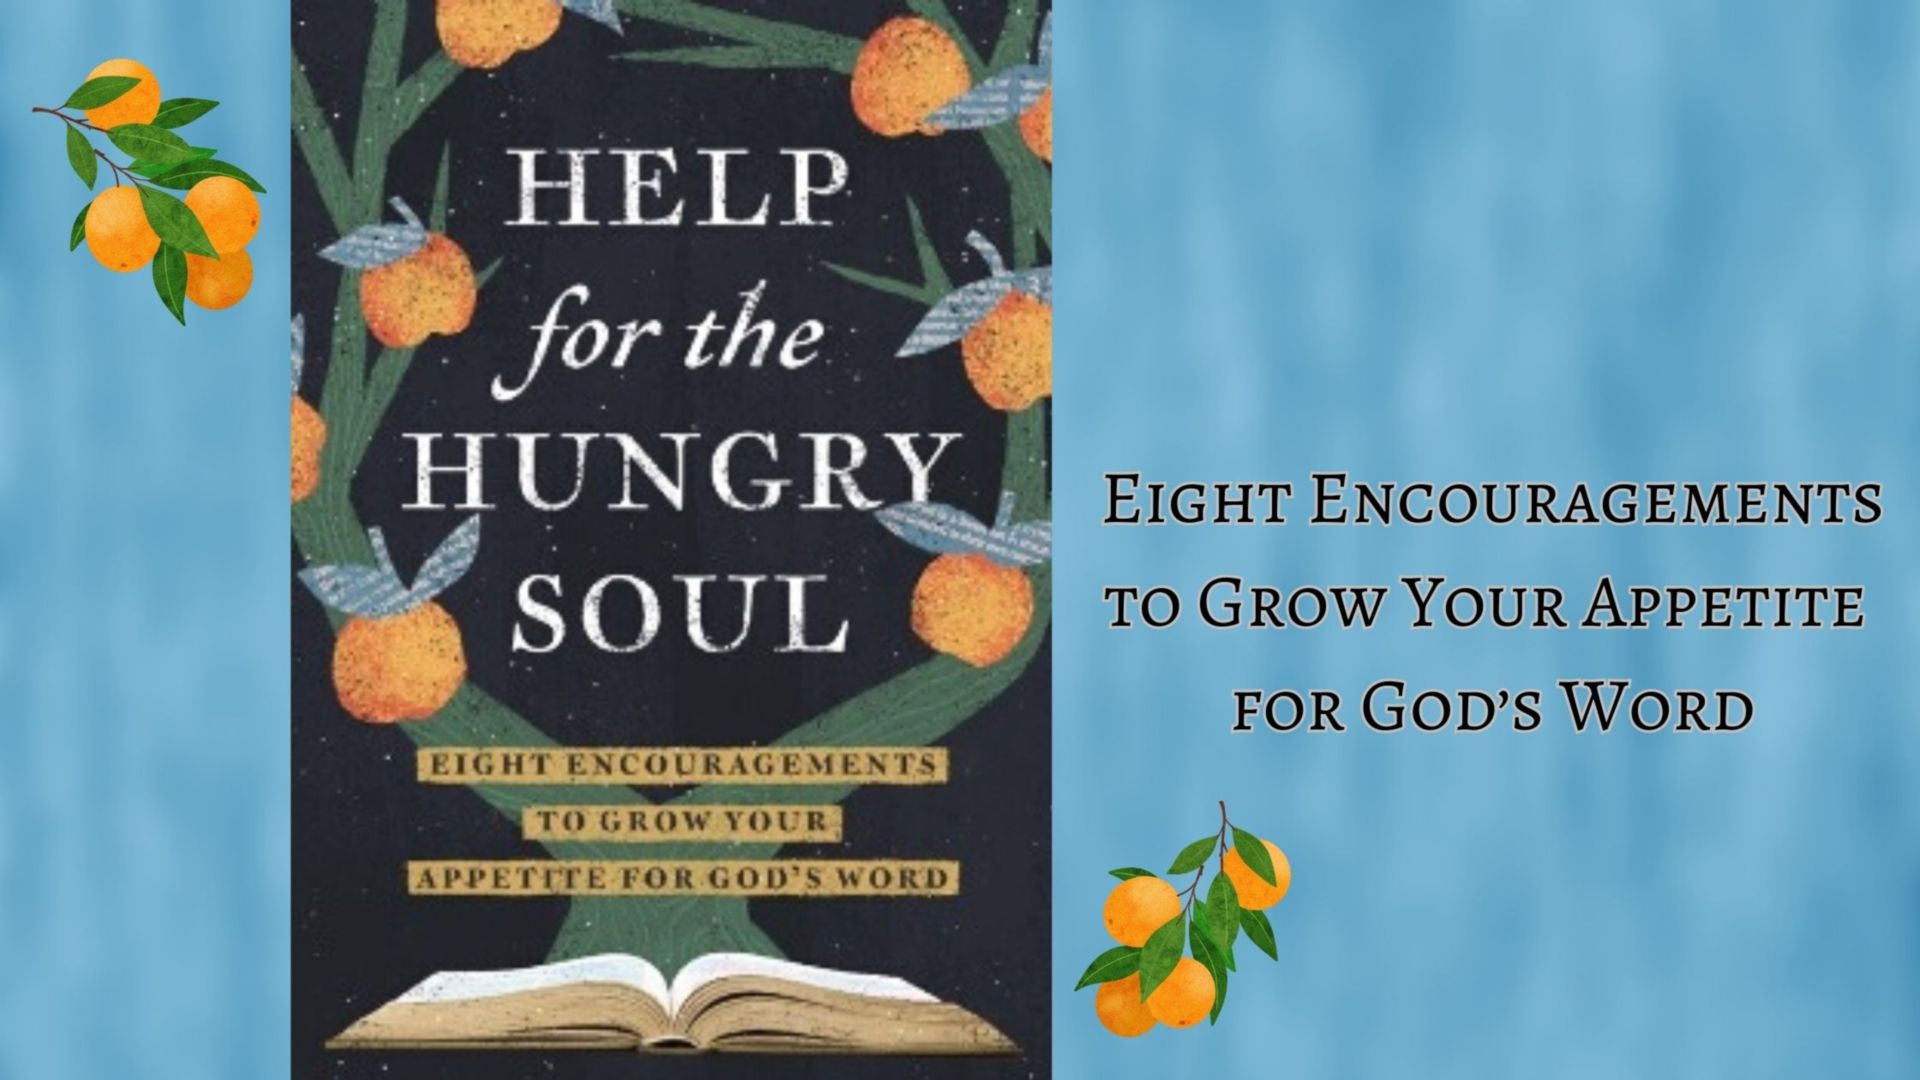 Review of Kristen Wetherell's book 'Help for the Hungry Soul'